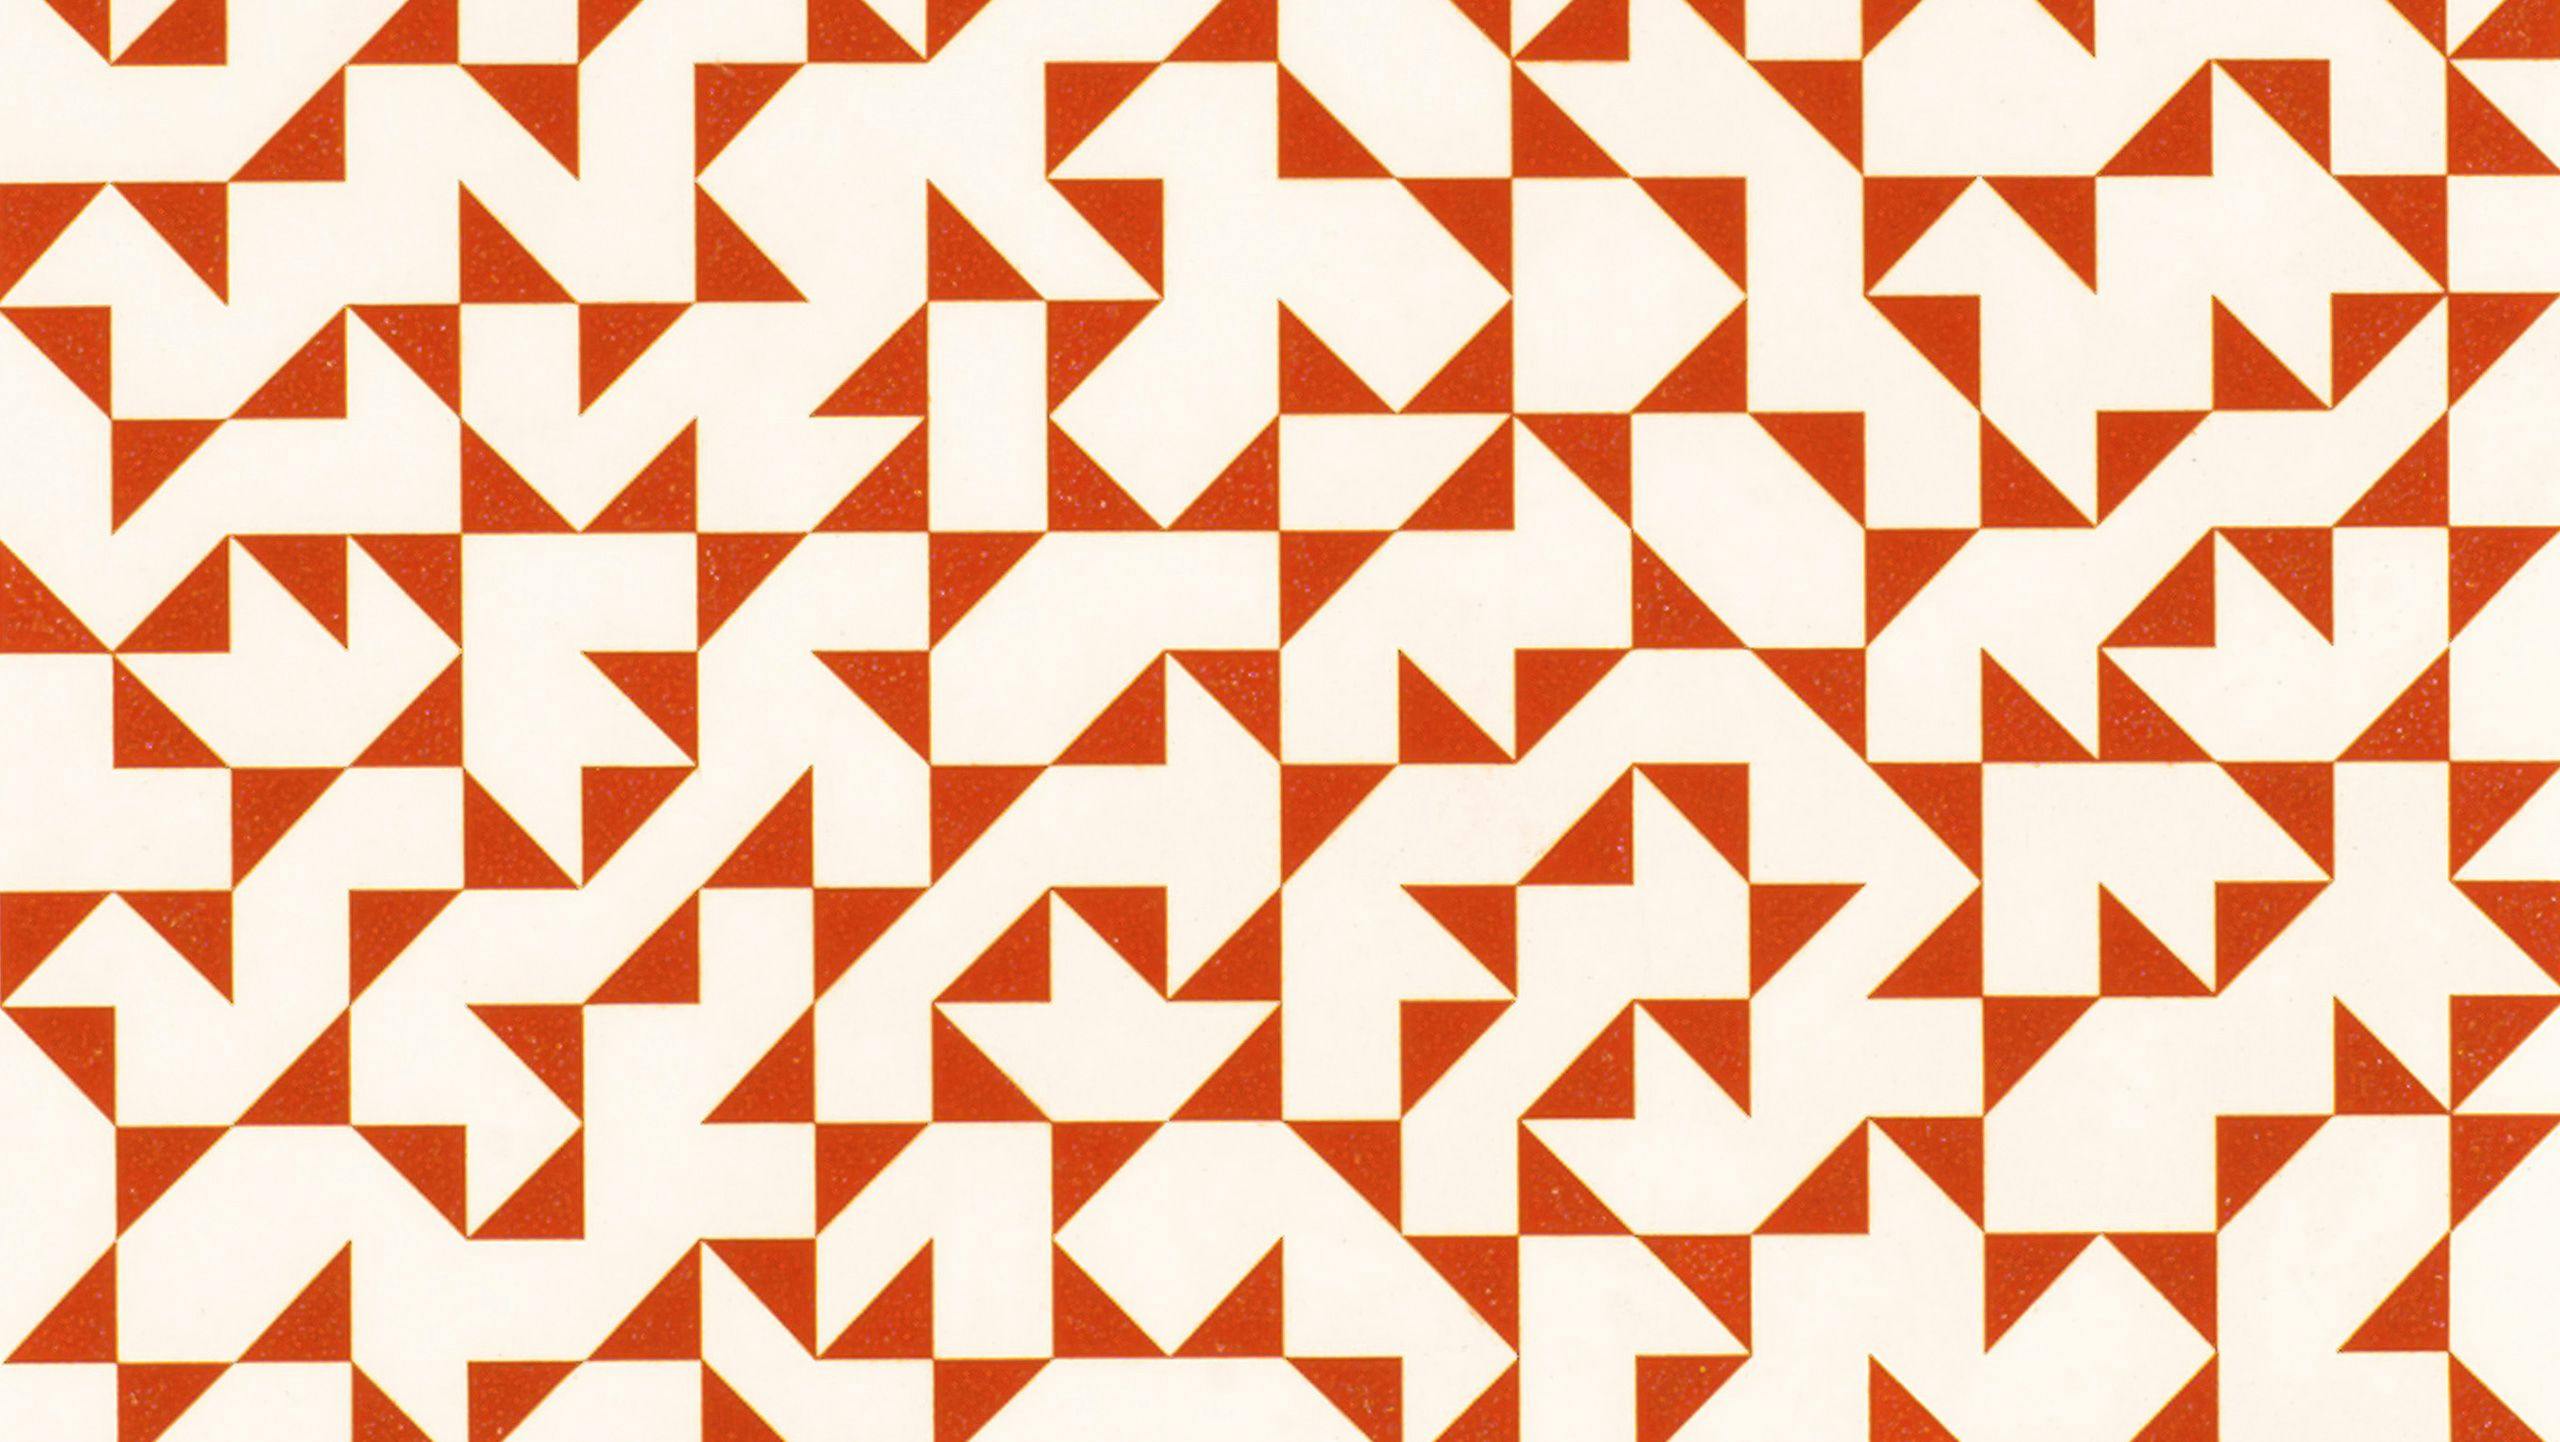 A detail of a print by Anni Albers, titled Triangulated Intaglio IV, dated 1976.